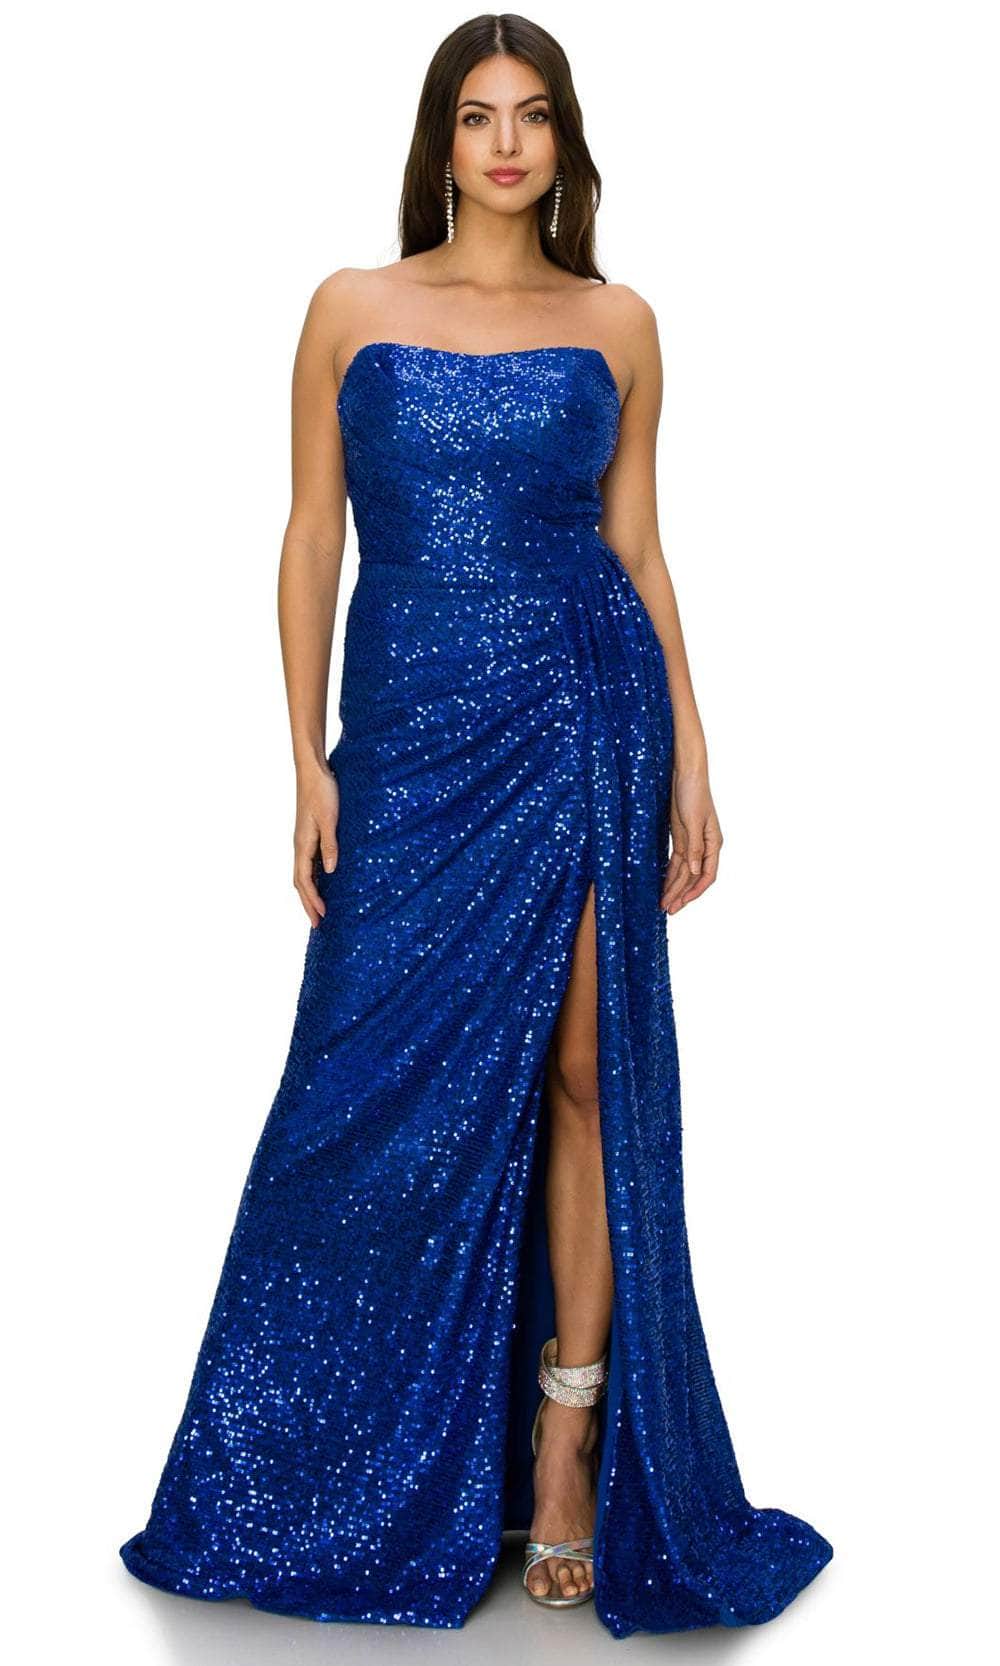 Cinderella Couture 8052J - Sequined Scoop Neck Prom Gown Special Occasion Dress